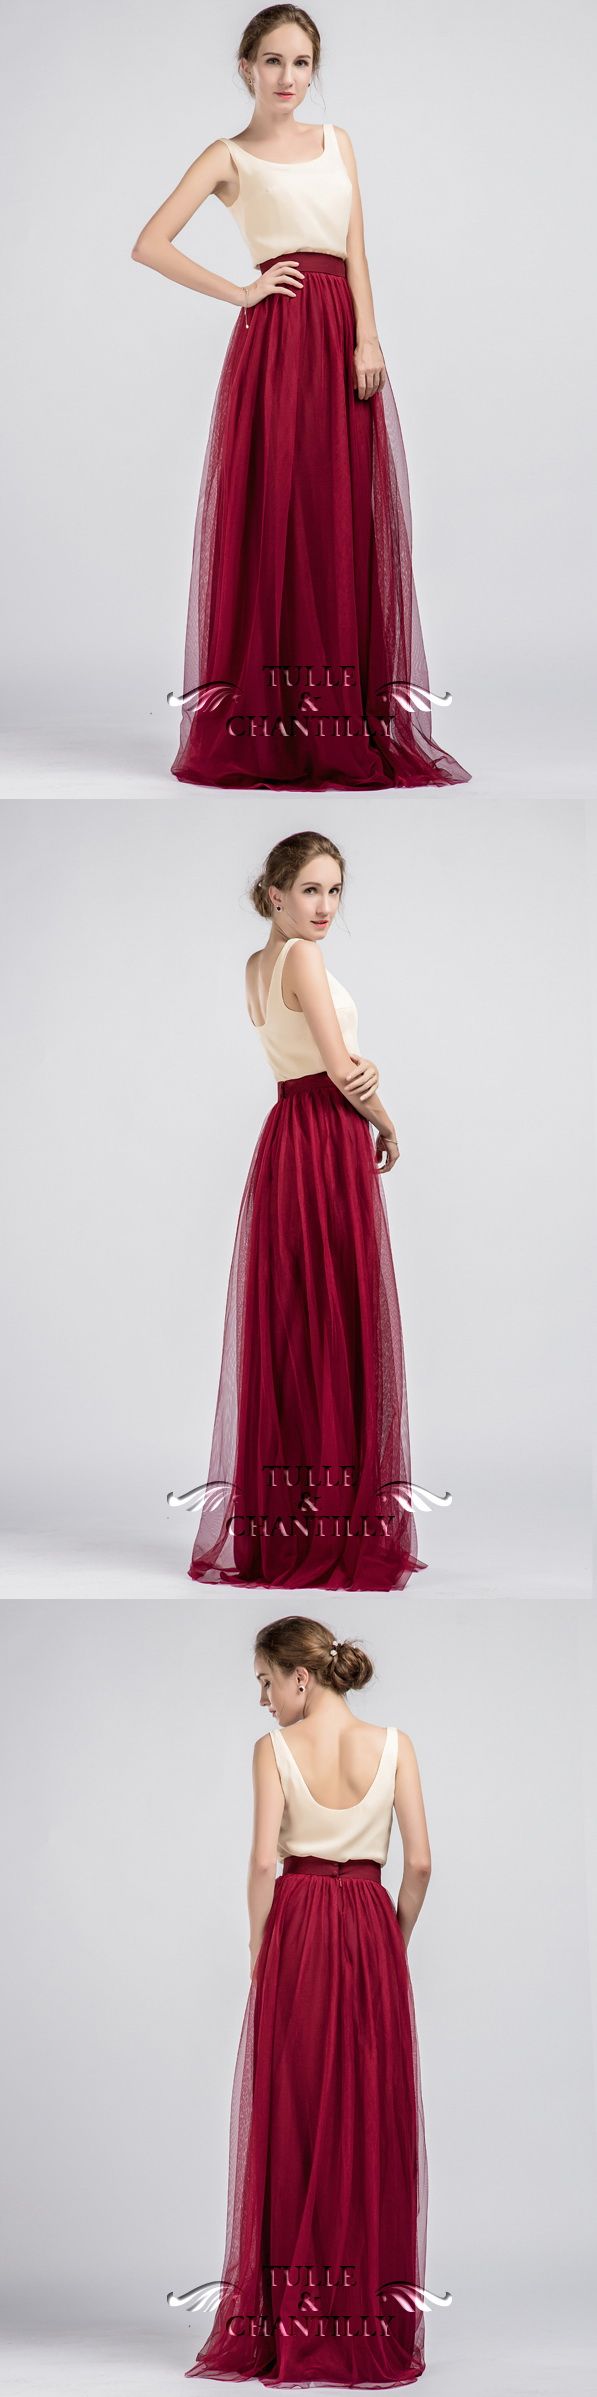 Wedding - Long Two Piece Bridesmaid Dresses With Marsala Tulle Skirt [TBQP335] - $169.00 : Custom Made Wedding, Prom, Evening Dresses Online